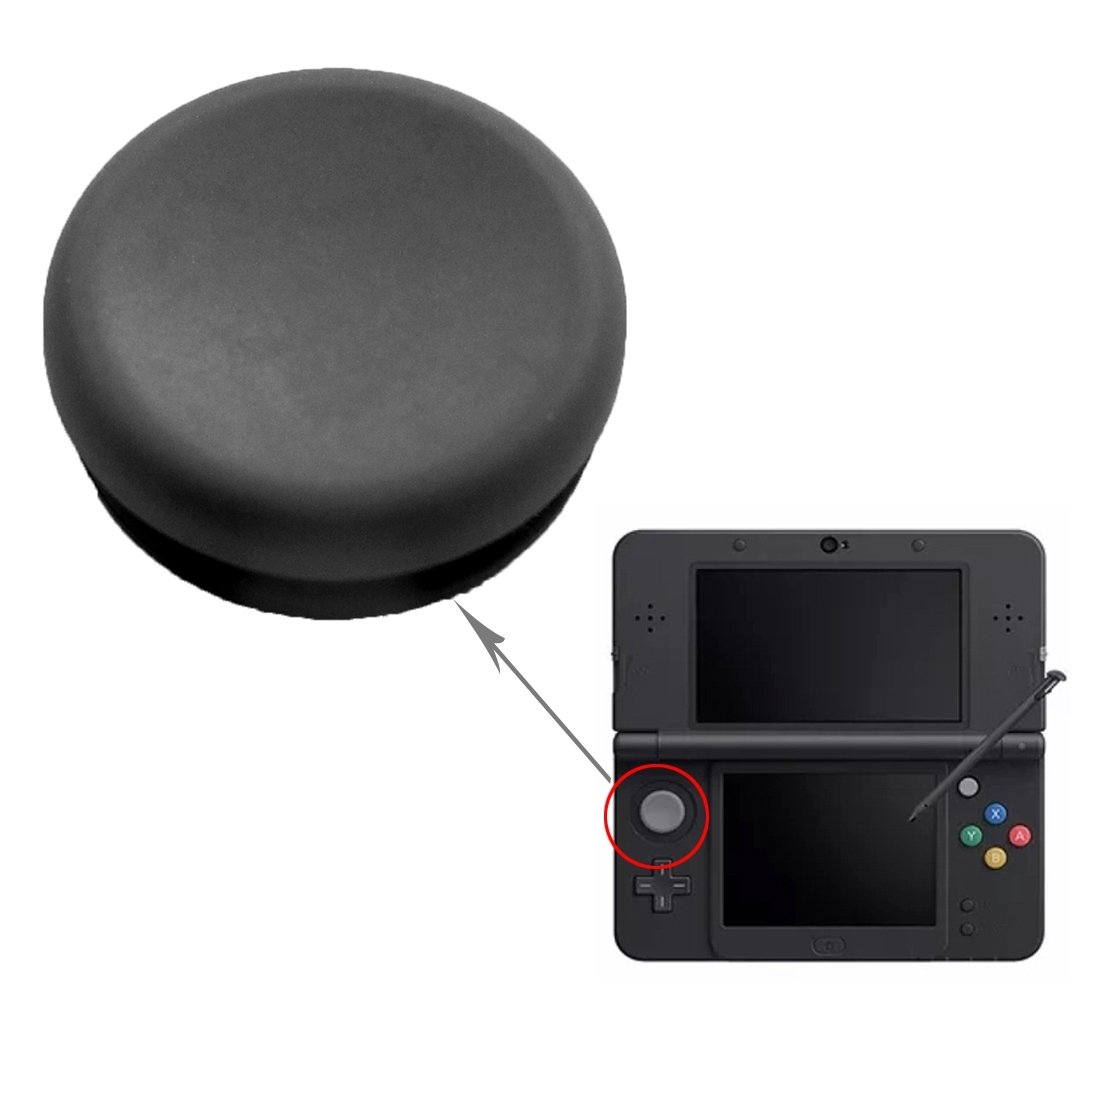 3D Analog Joystick Thumbstick Grips Cap Cover Button Replacement Repair Part Case for Nintendo New 3DS XL New 3DS LL 3DS XL 3DS LL 2DS 3DS Gray